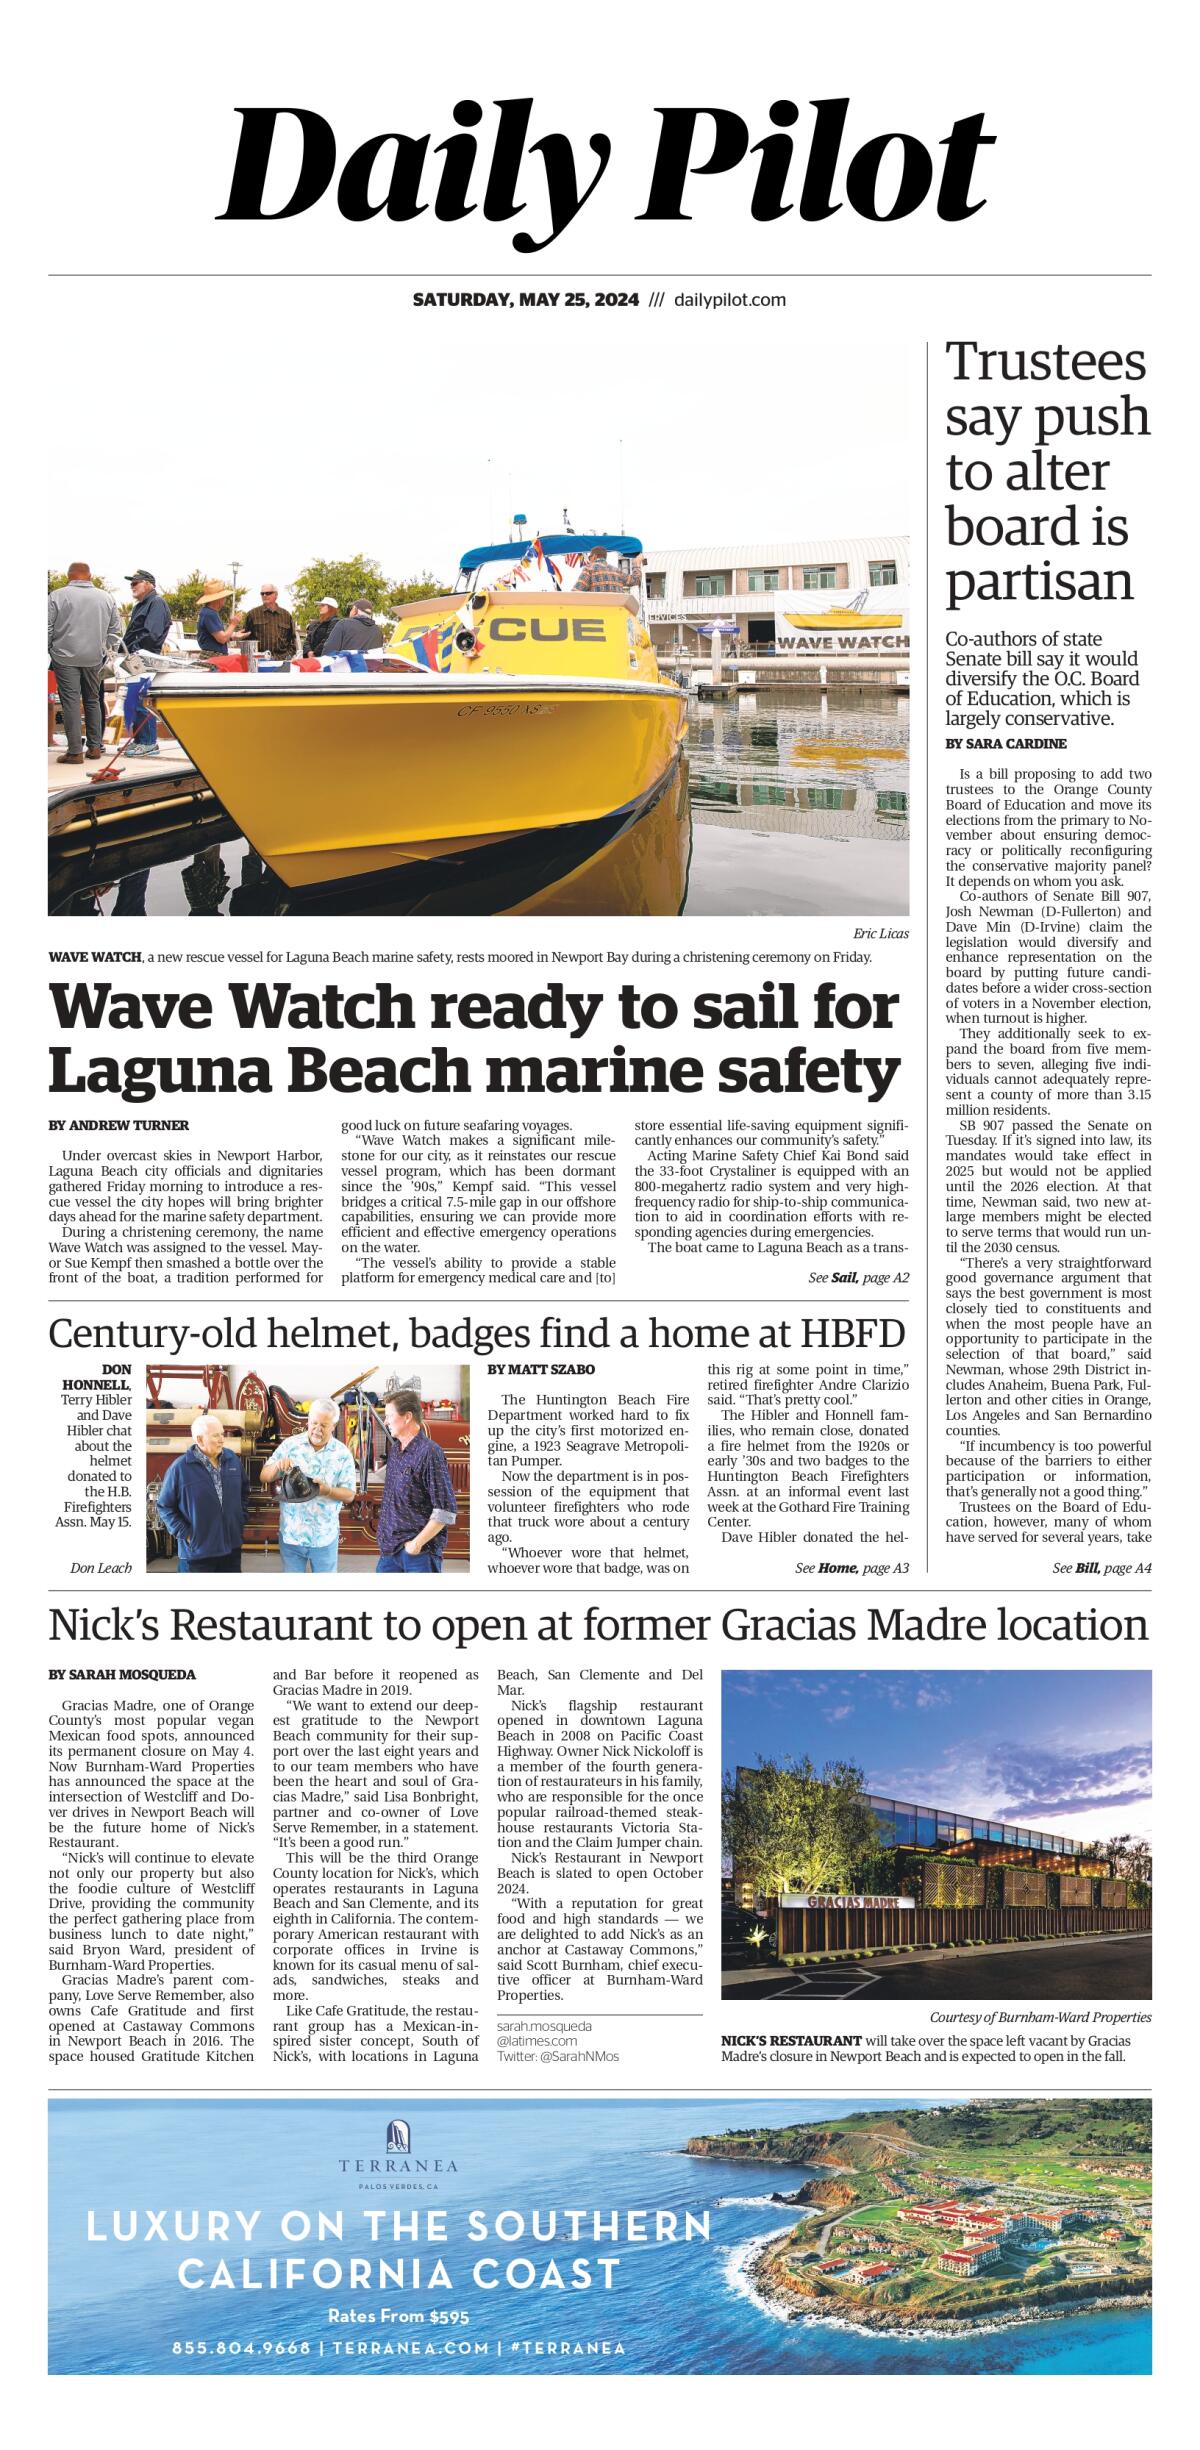 Front page of the Daily Pilot e-newspaper for Saturday, May 25, 2024.